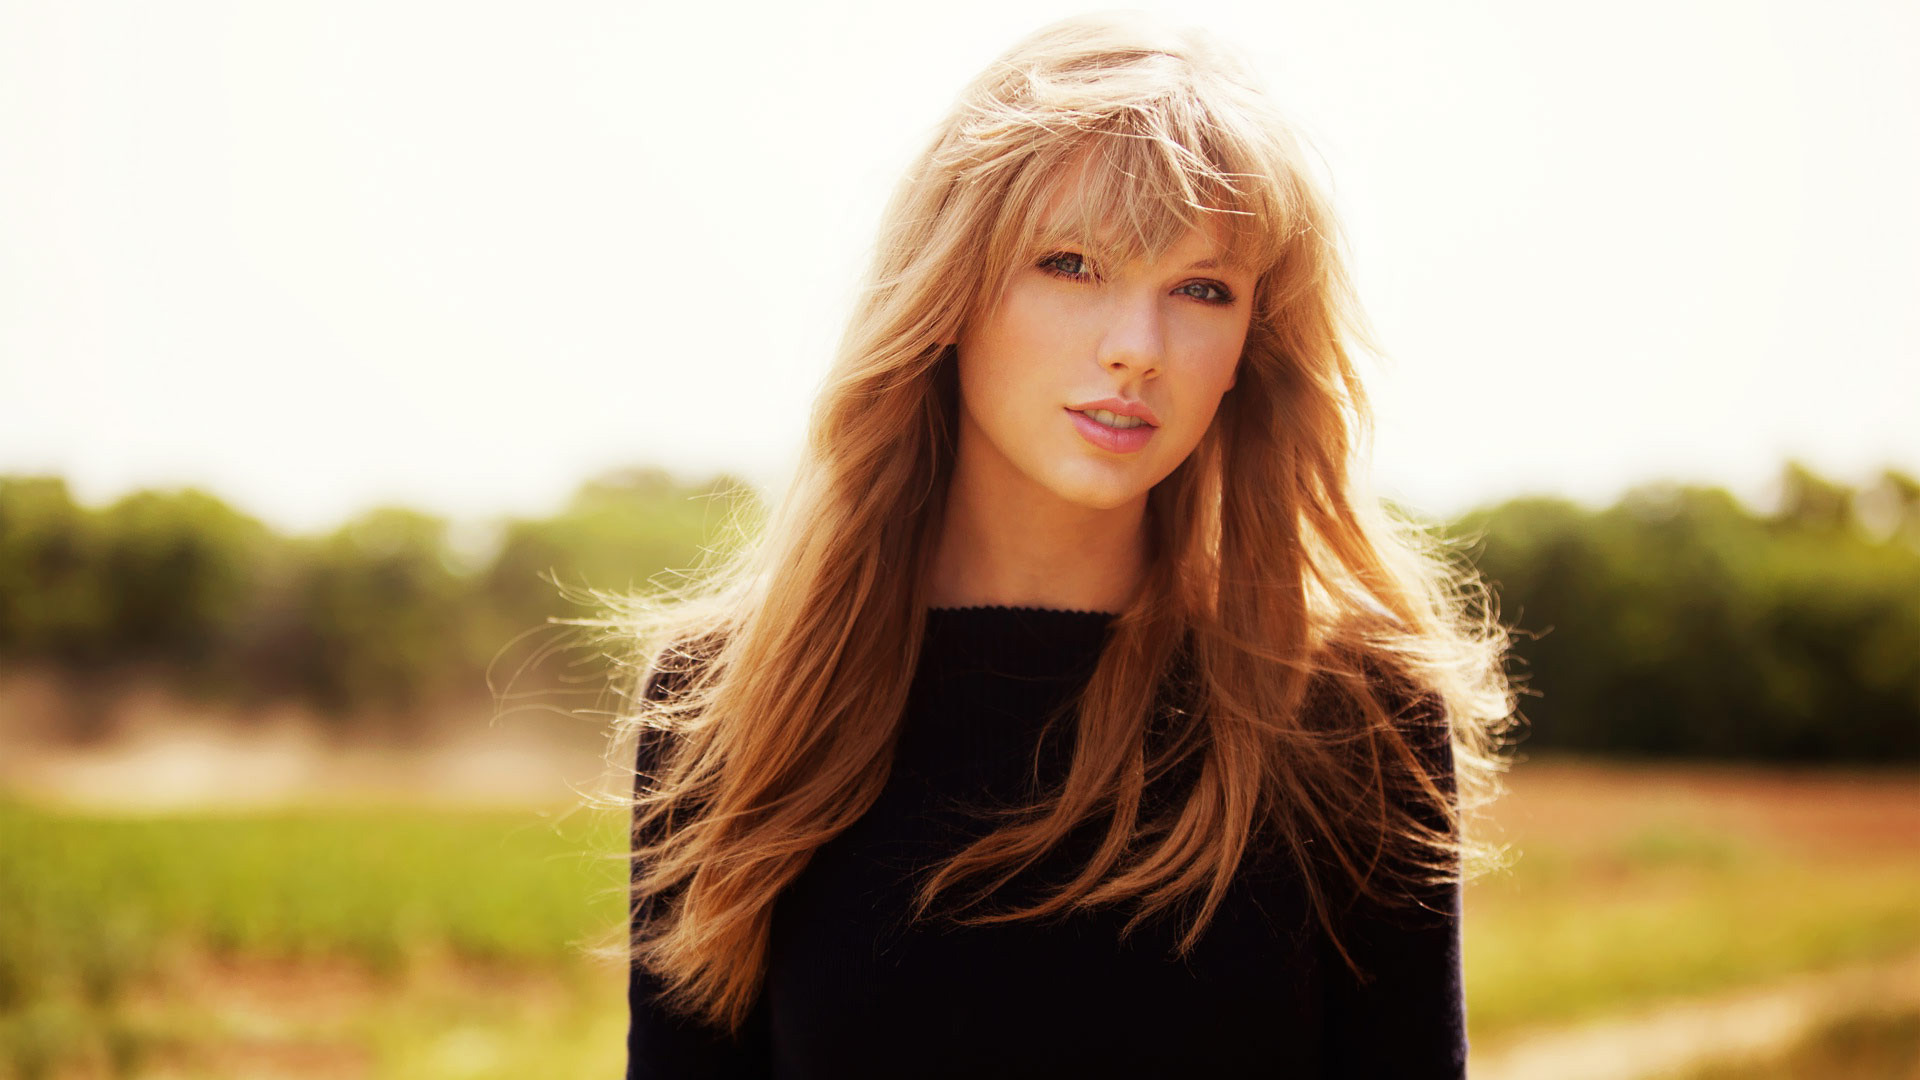 Taylor Swift Photo Wallpaper High Definition